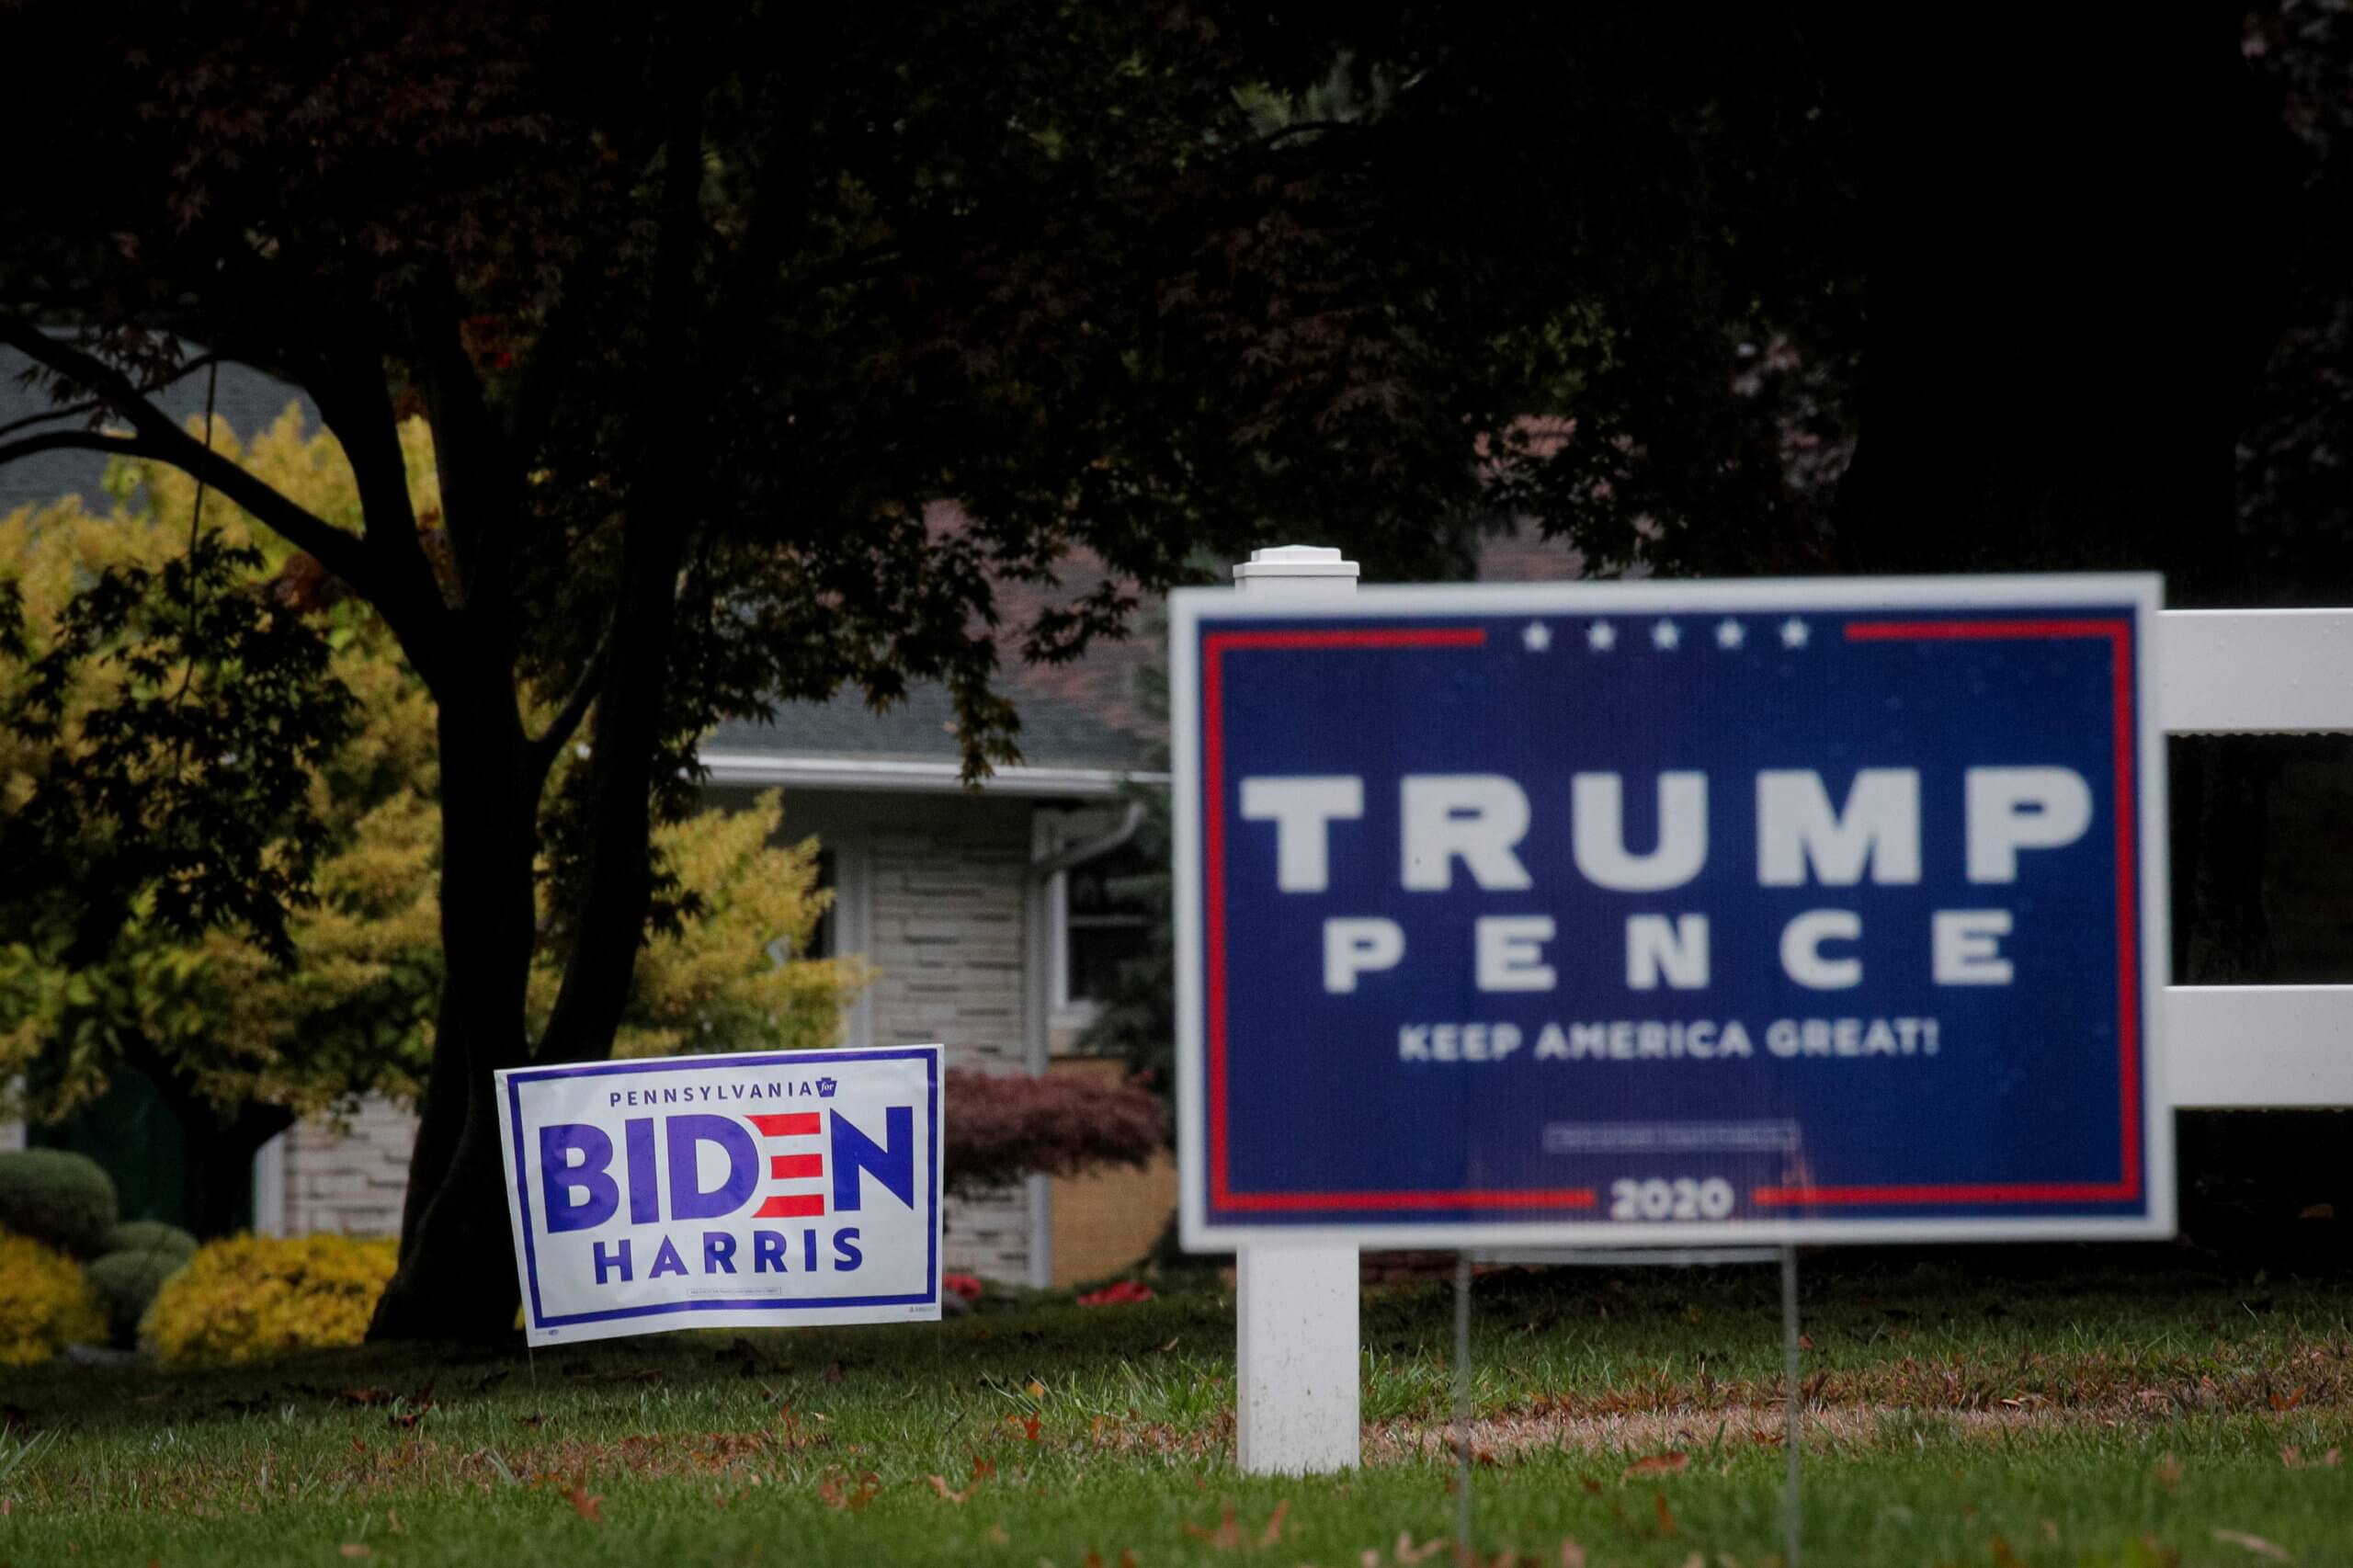 While early voting favors Biden, Republicans may vote in ...